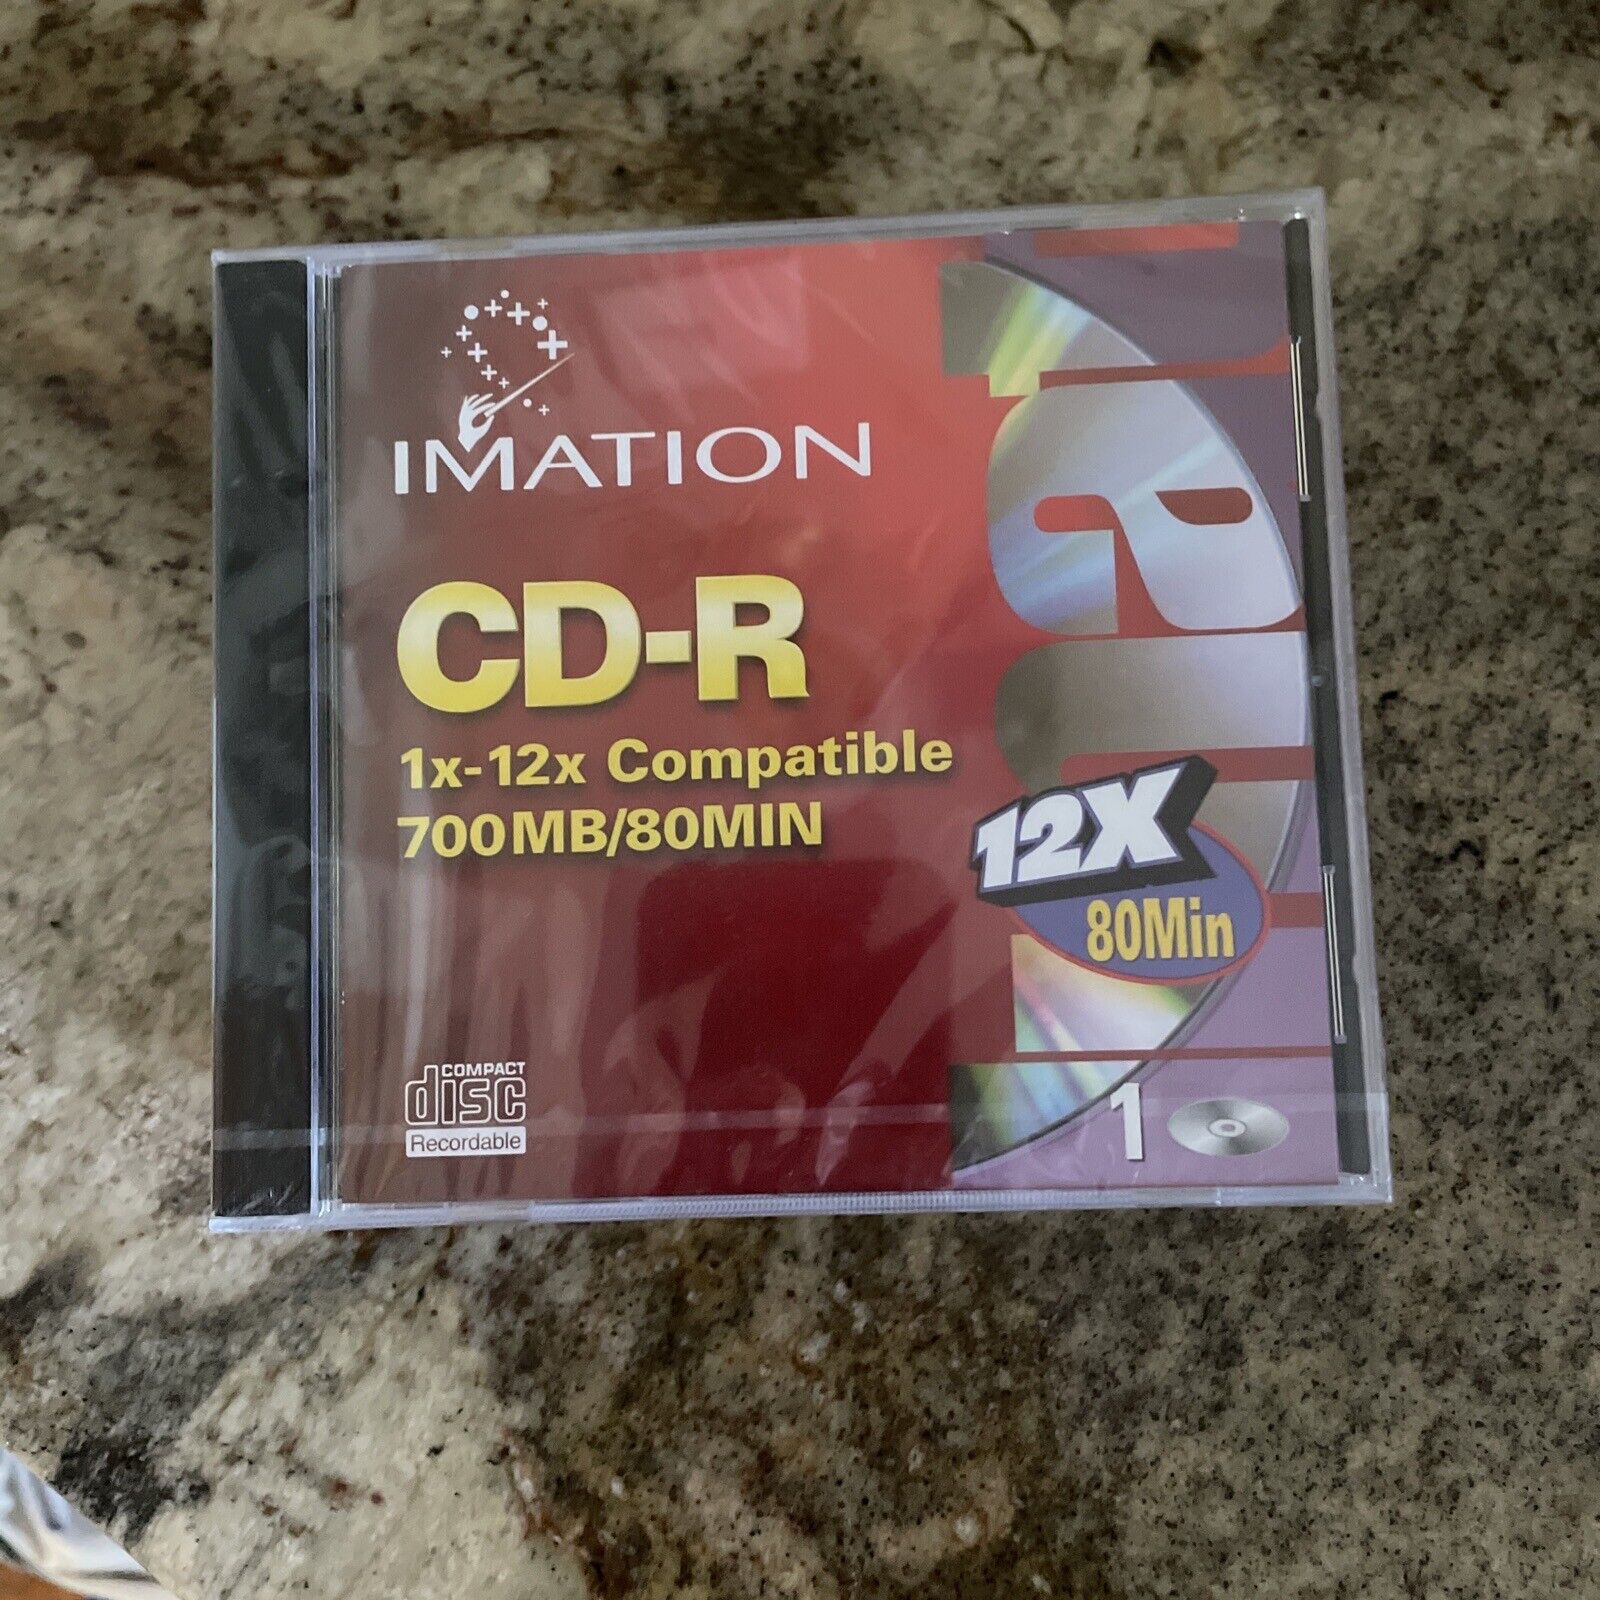 IMATION CD-R 1X-12X COMPATIBLE, 12X 80 MIN.  Lot Of 6 New Sealed